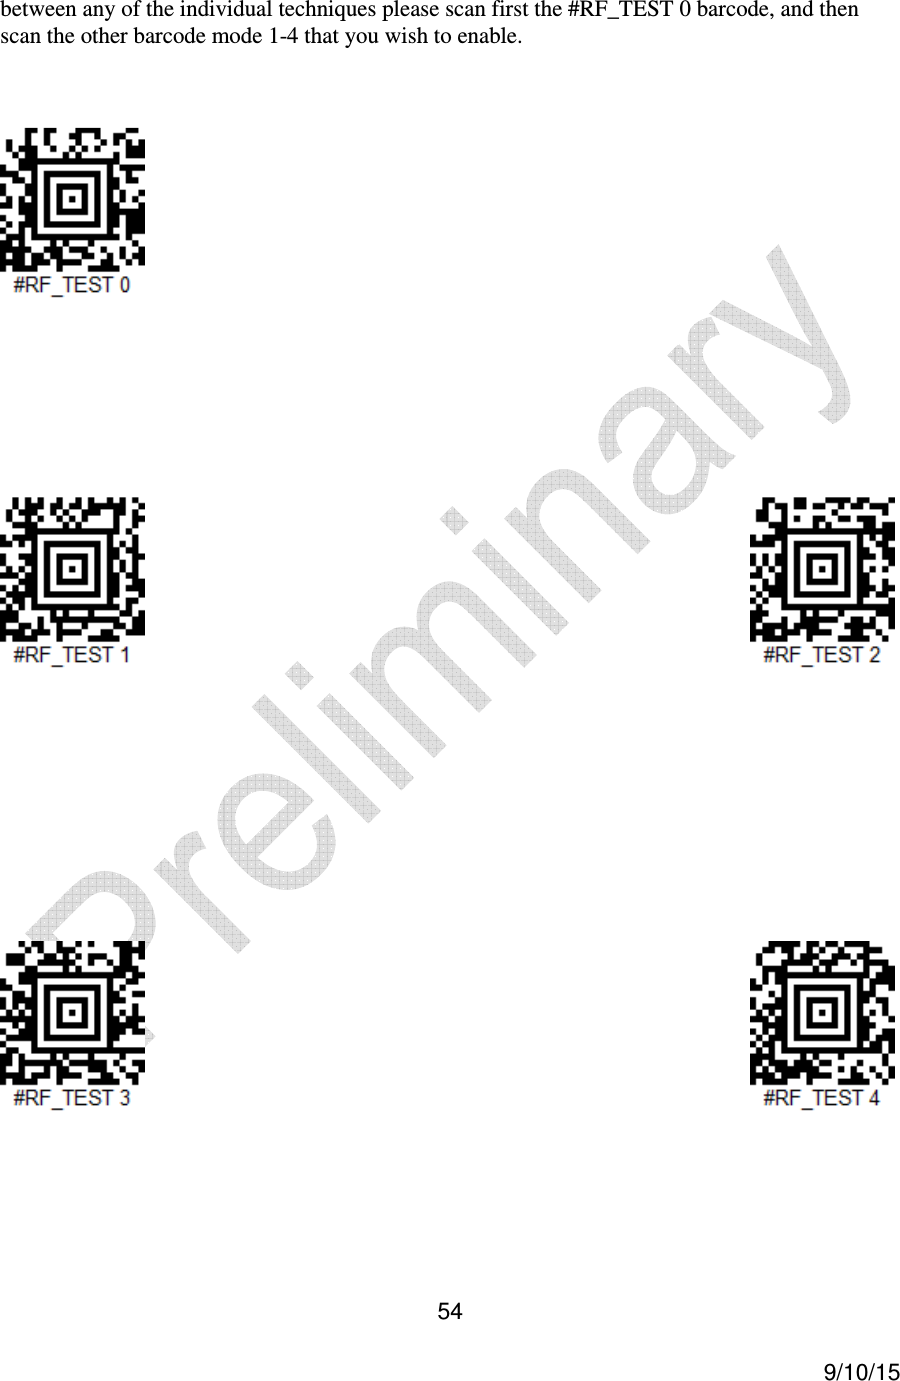  54     9/10/15 between any of the individual techniques please scan first the #RF_TEST 0 barcode, and then scan the other barcode mode 1-4 that you wish to enable.                                                                                                                                                                                                                                                                         